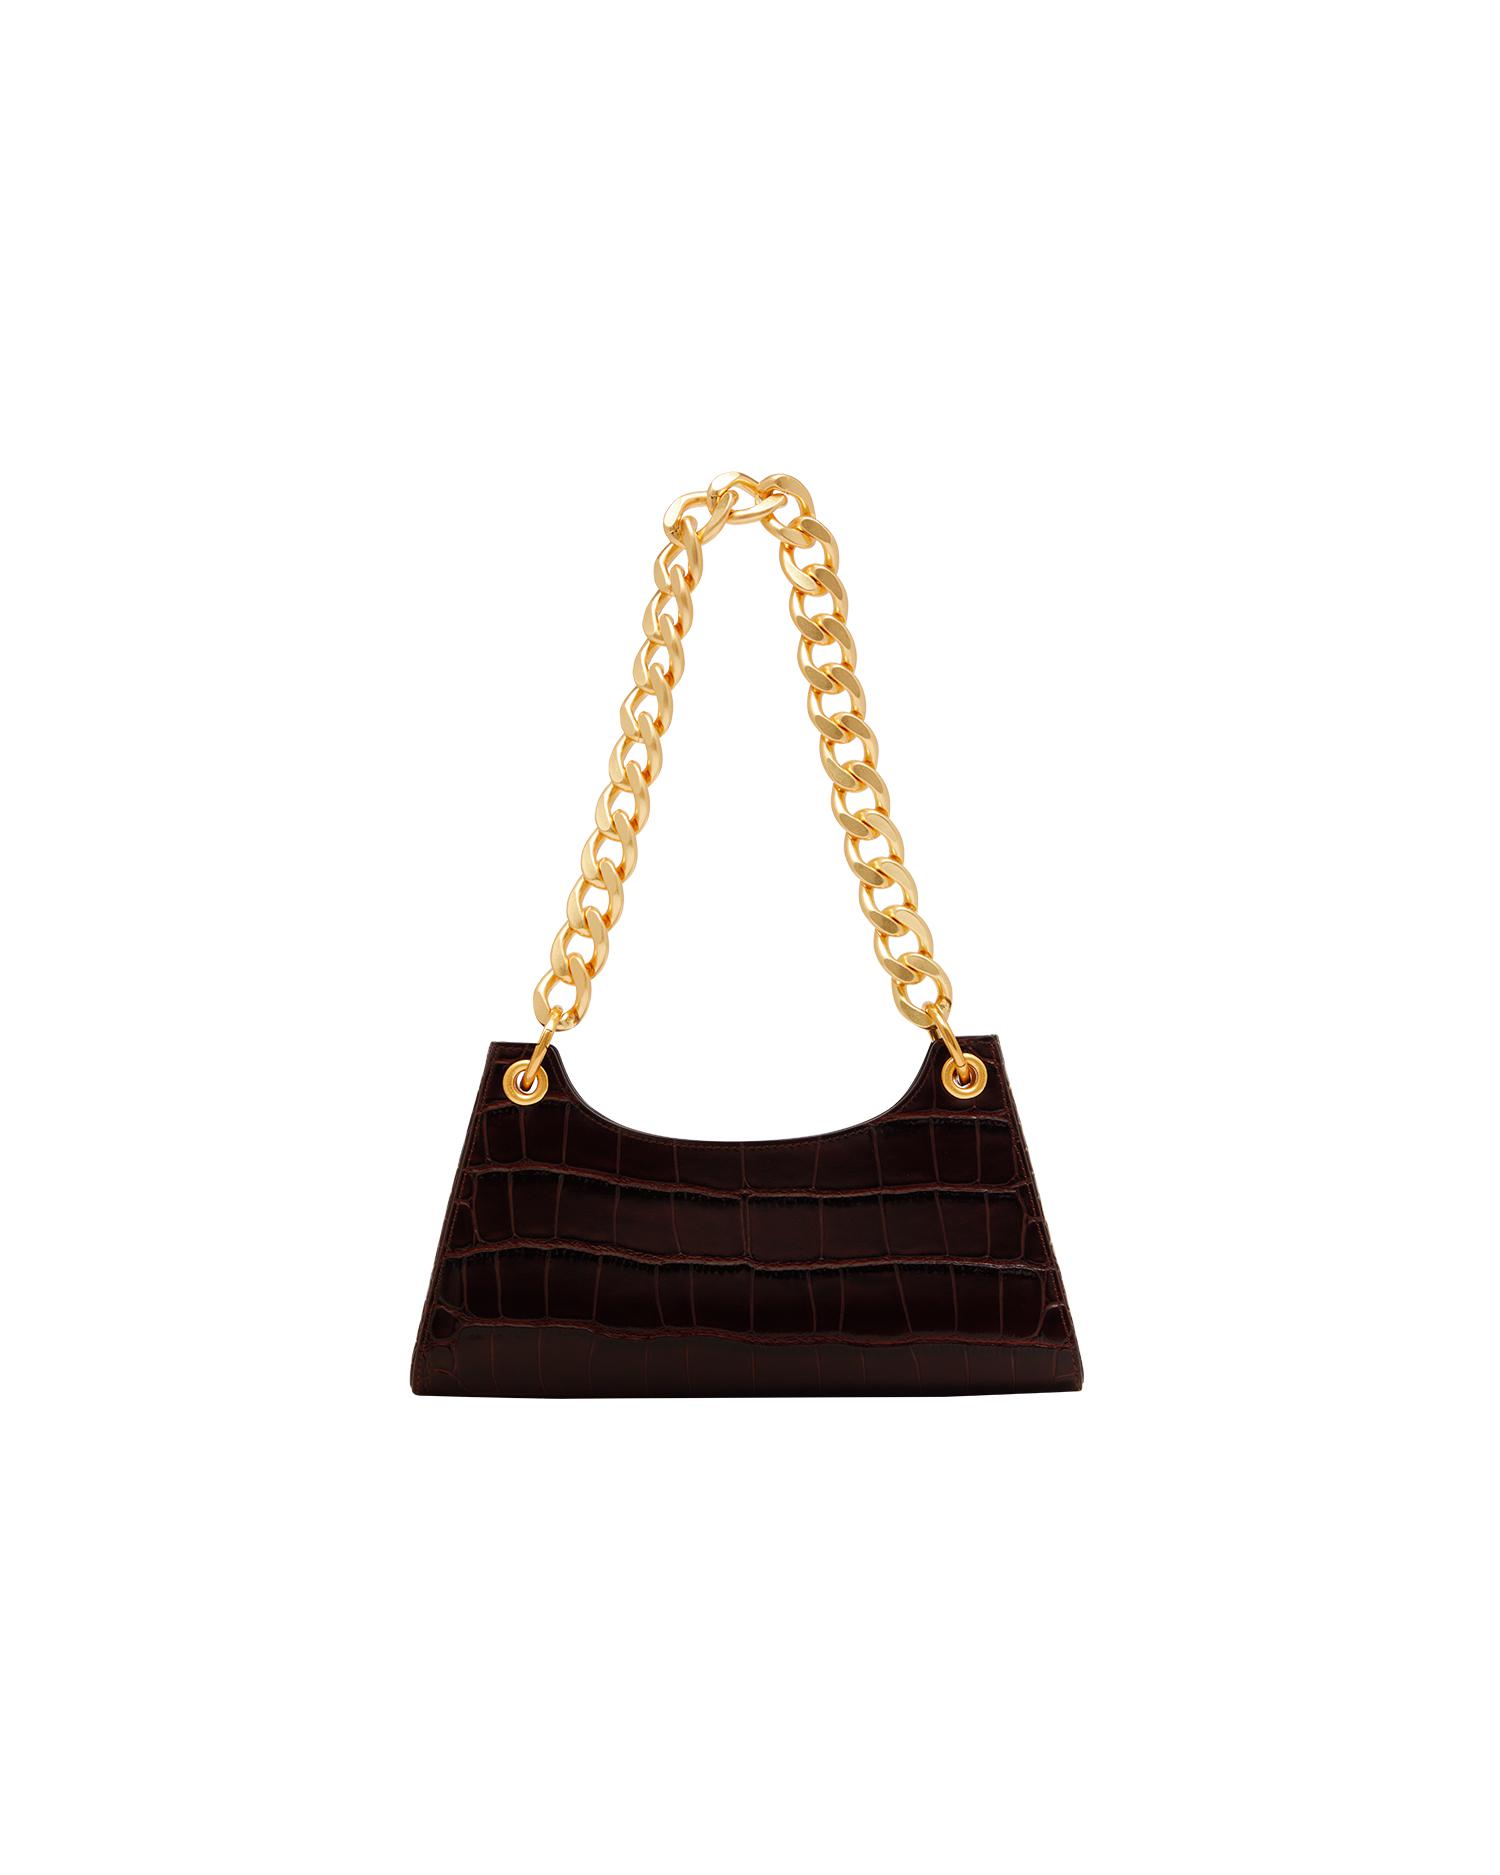 Froggy With Gold Chain clutch bag by APEDE MOD